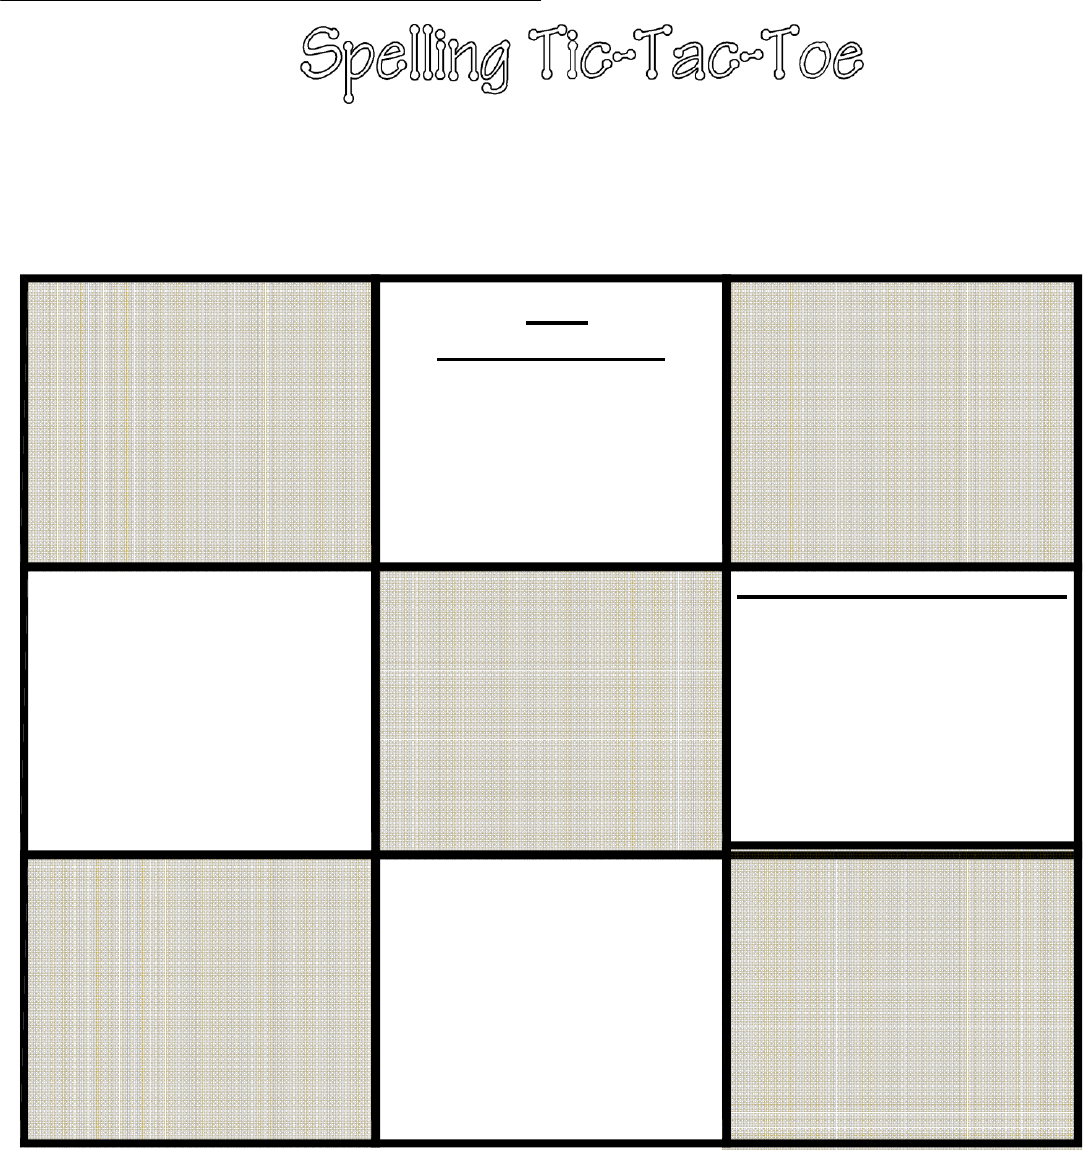 67A Tic Tac Toe Template | Wiring Library In Tic Tac Toe Template Word